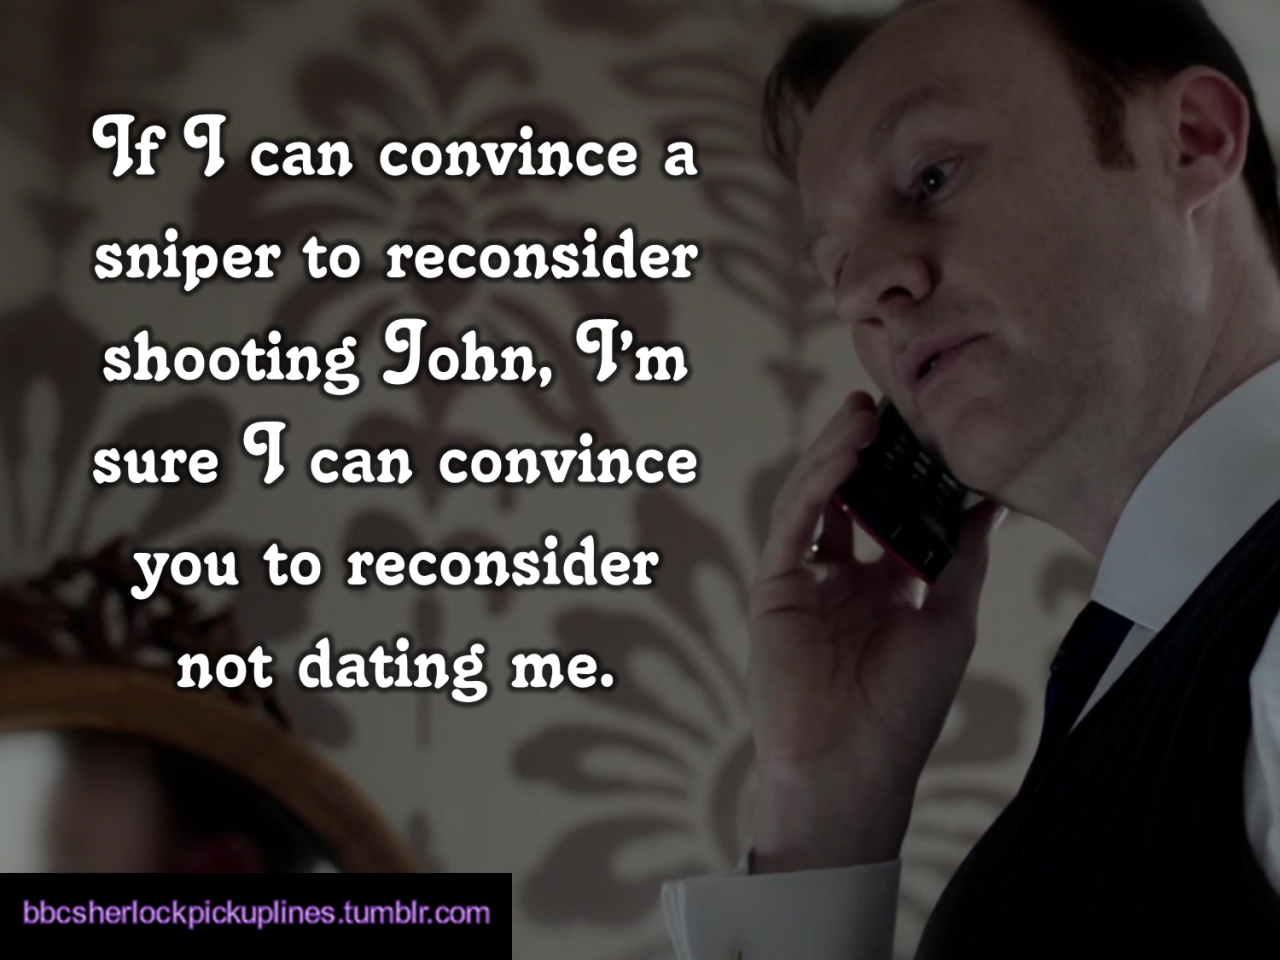 &ldquo;If I can convince a sniper to reconsider shooting John, I&rsquo;m